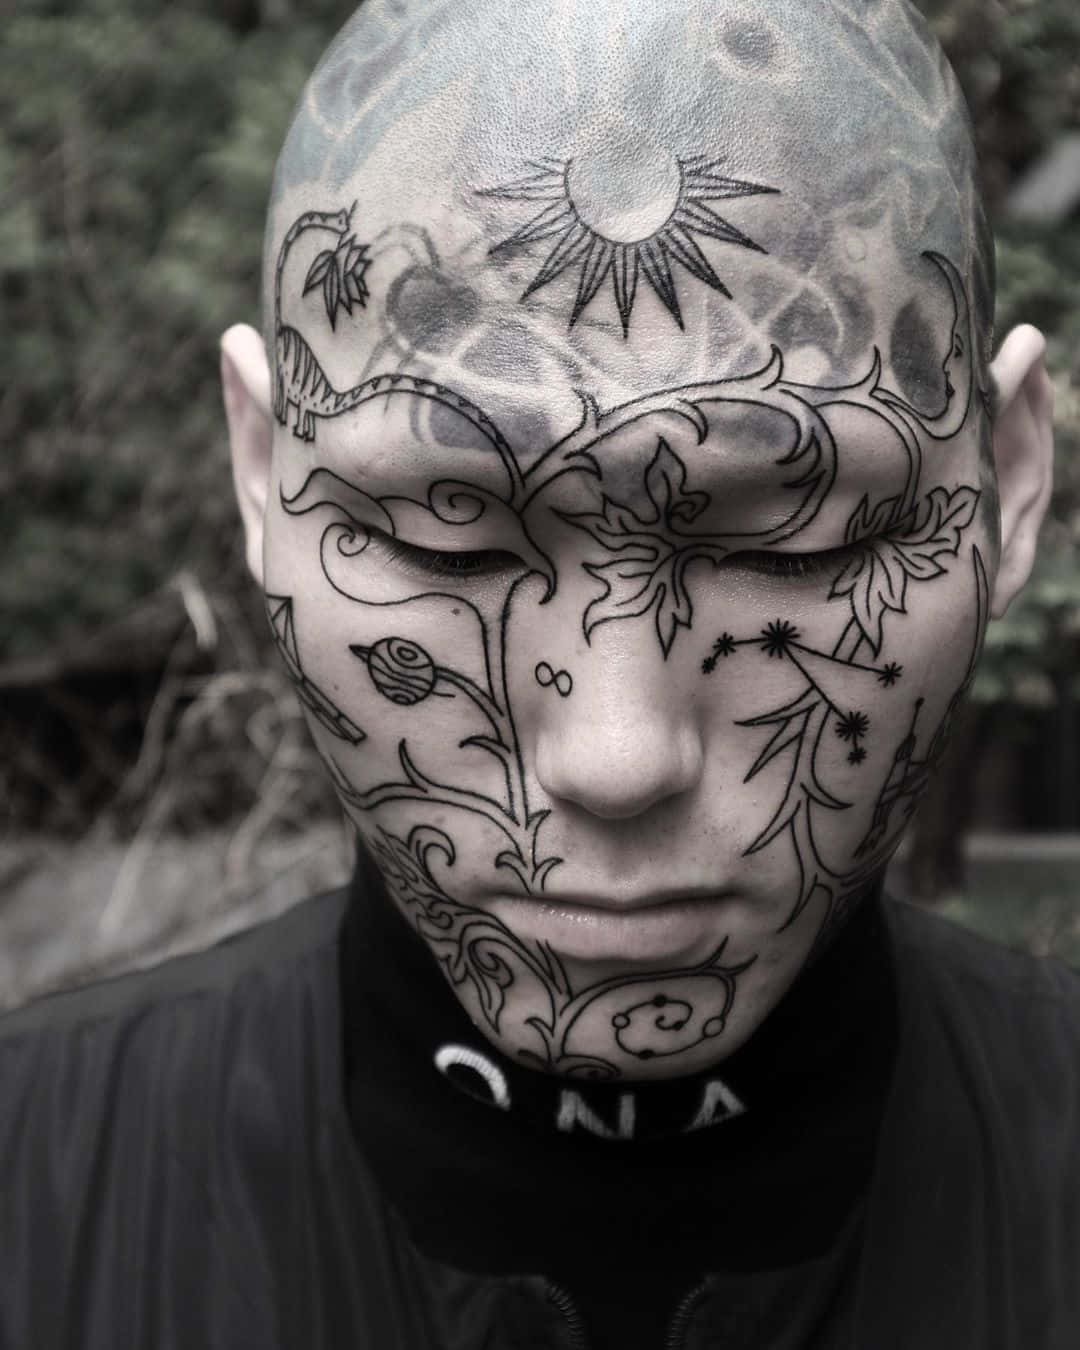 A Man With A Tattoo On His Head